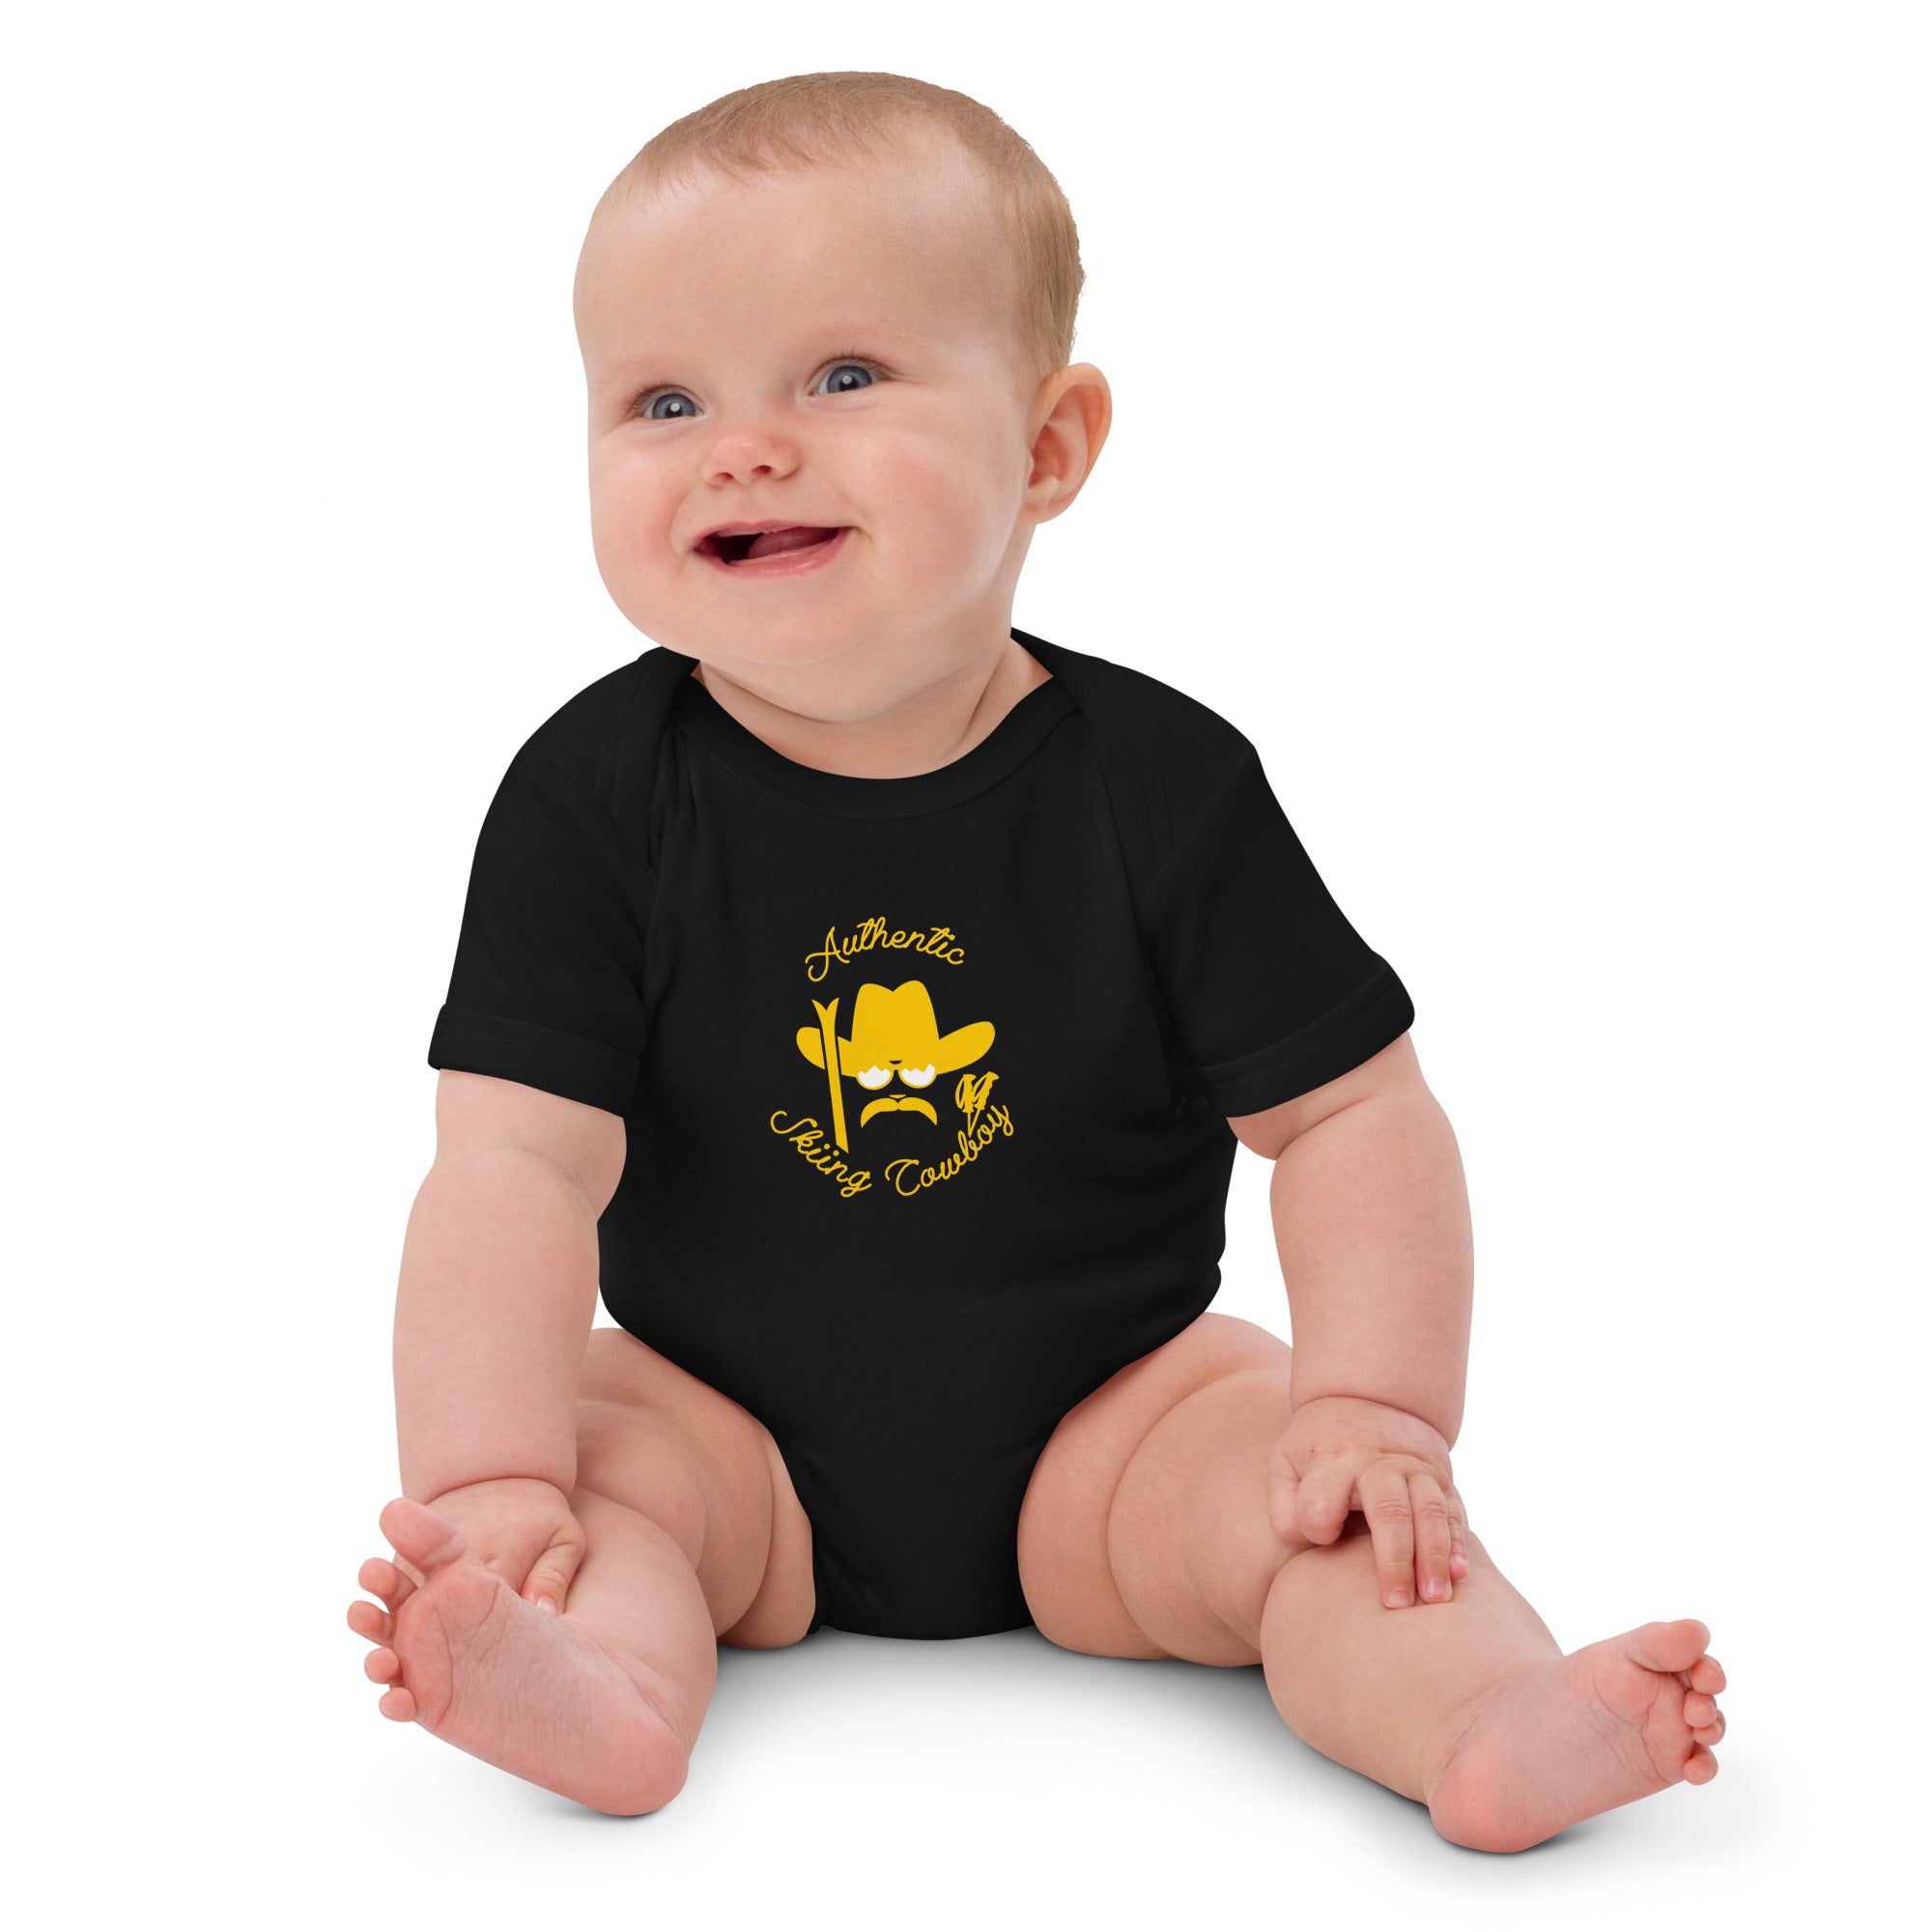 Organic cotton baby bodysuit Authentic Skiing Cowboy gold